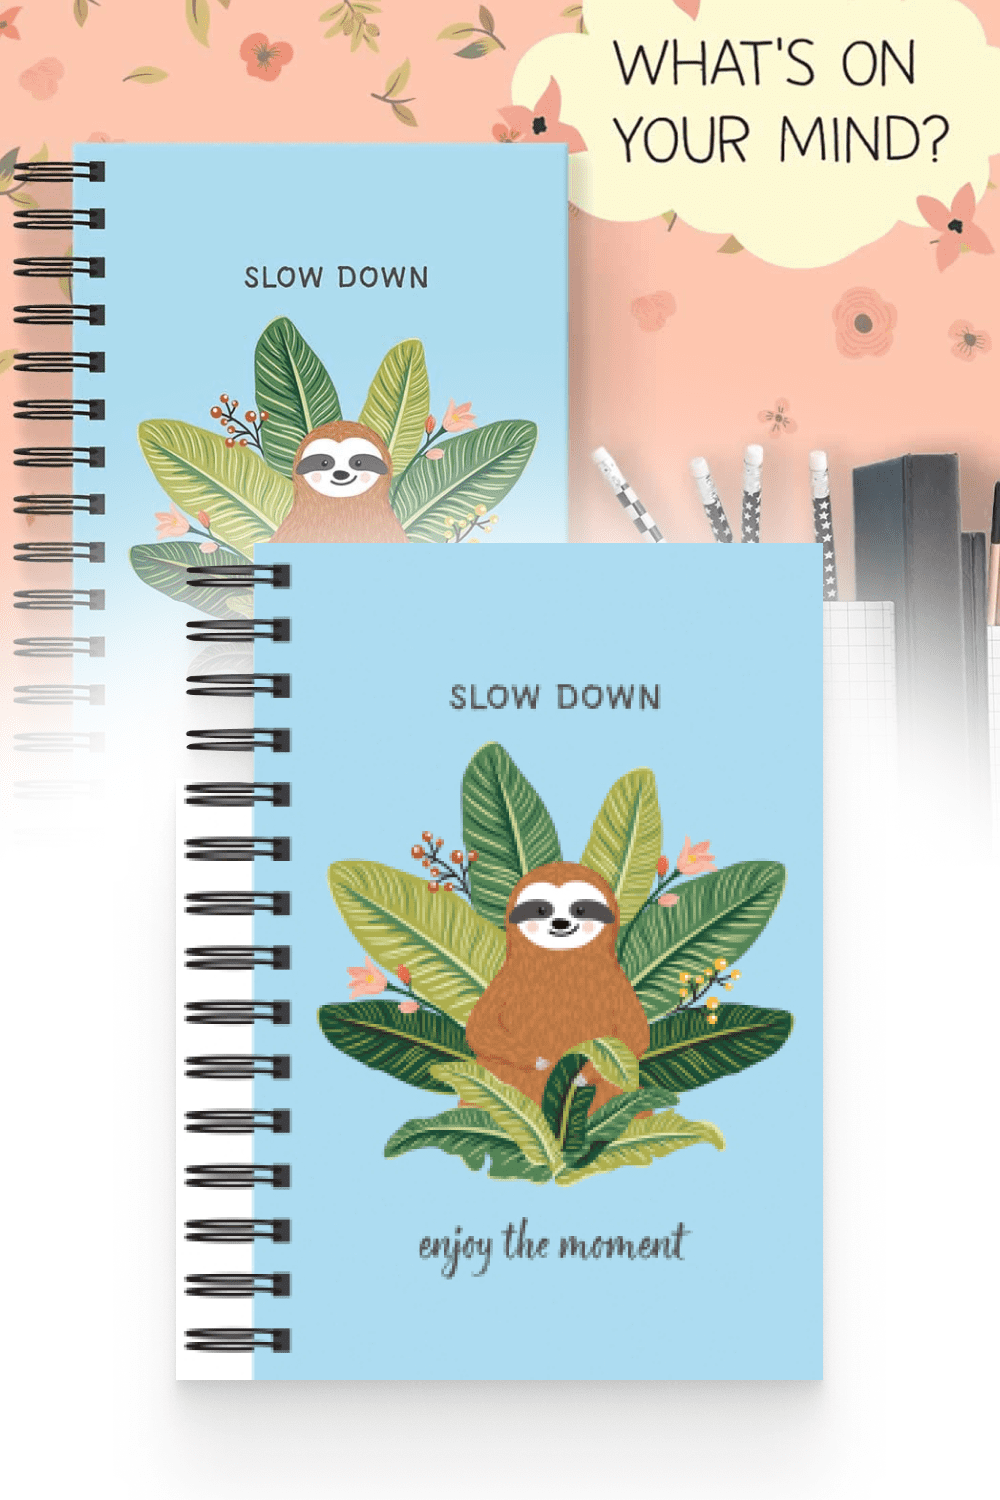 Sloth Journal with funny animal and text on the cover.